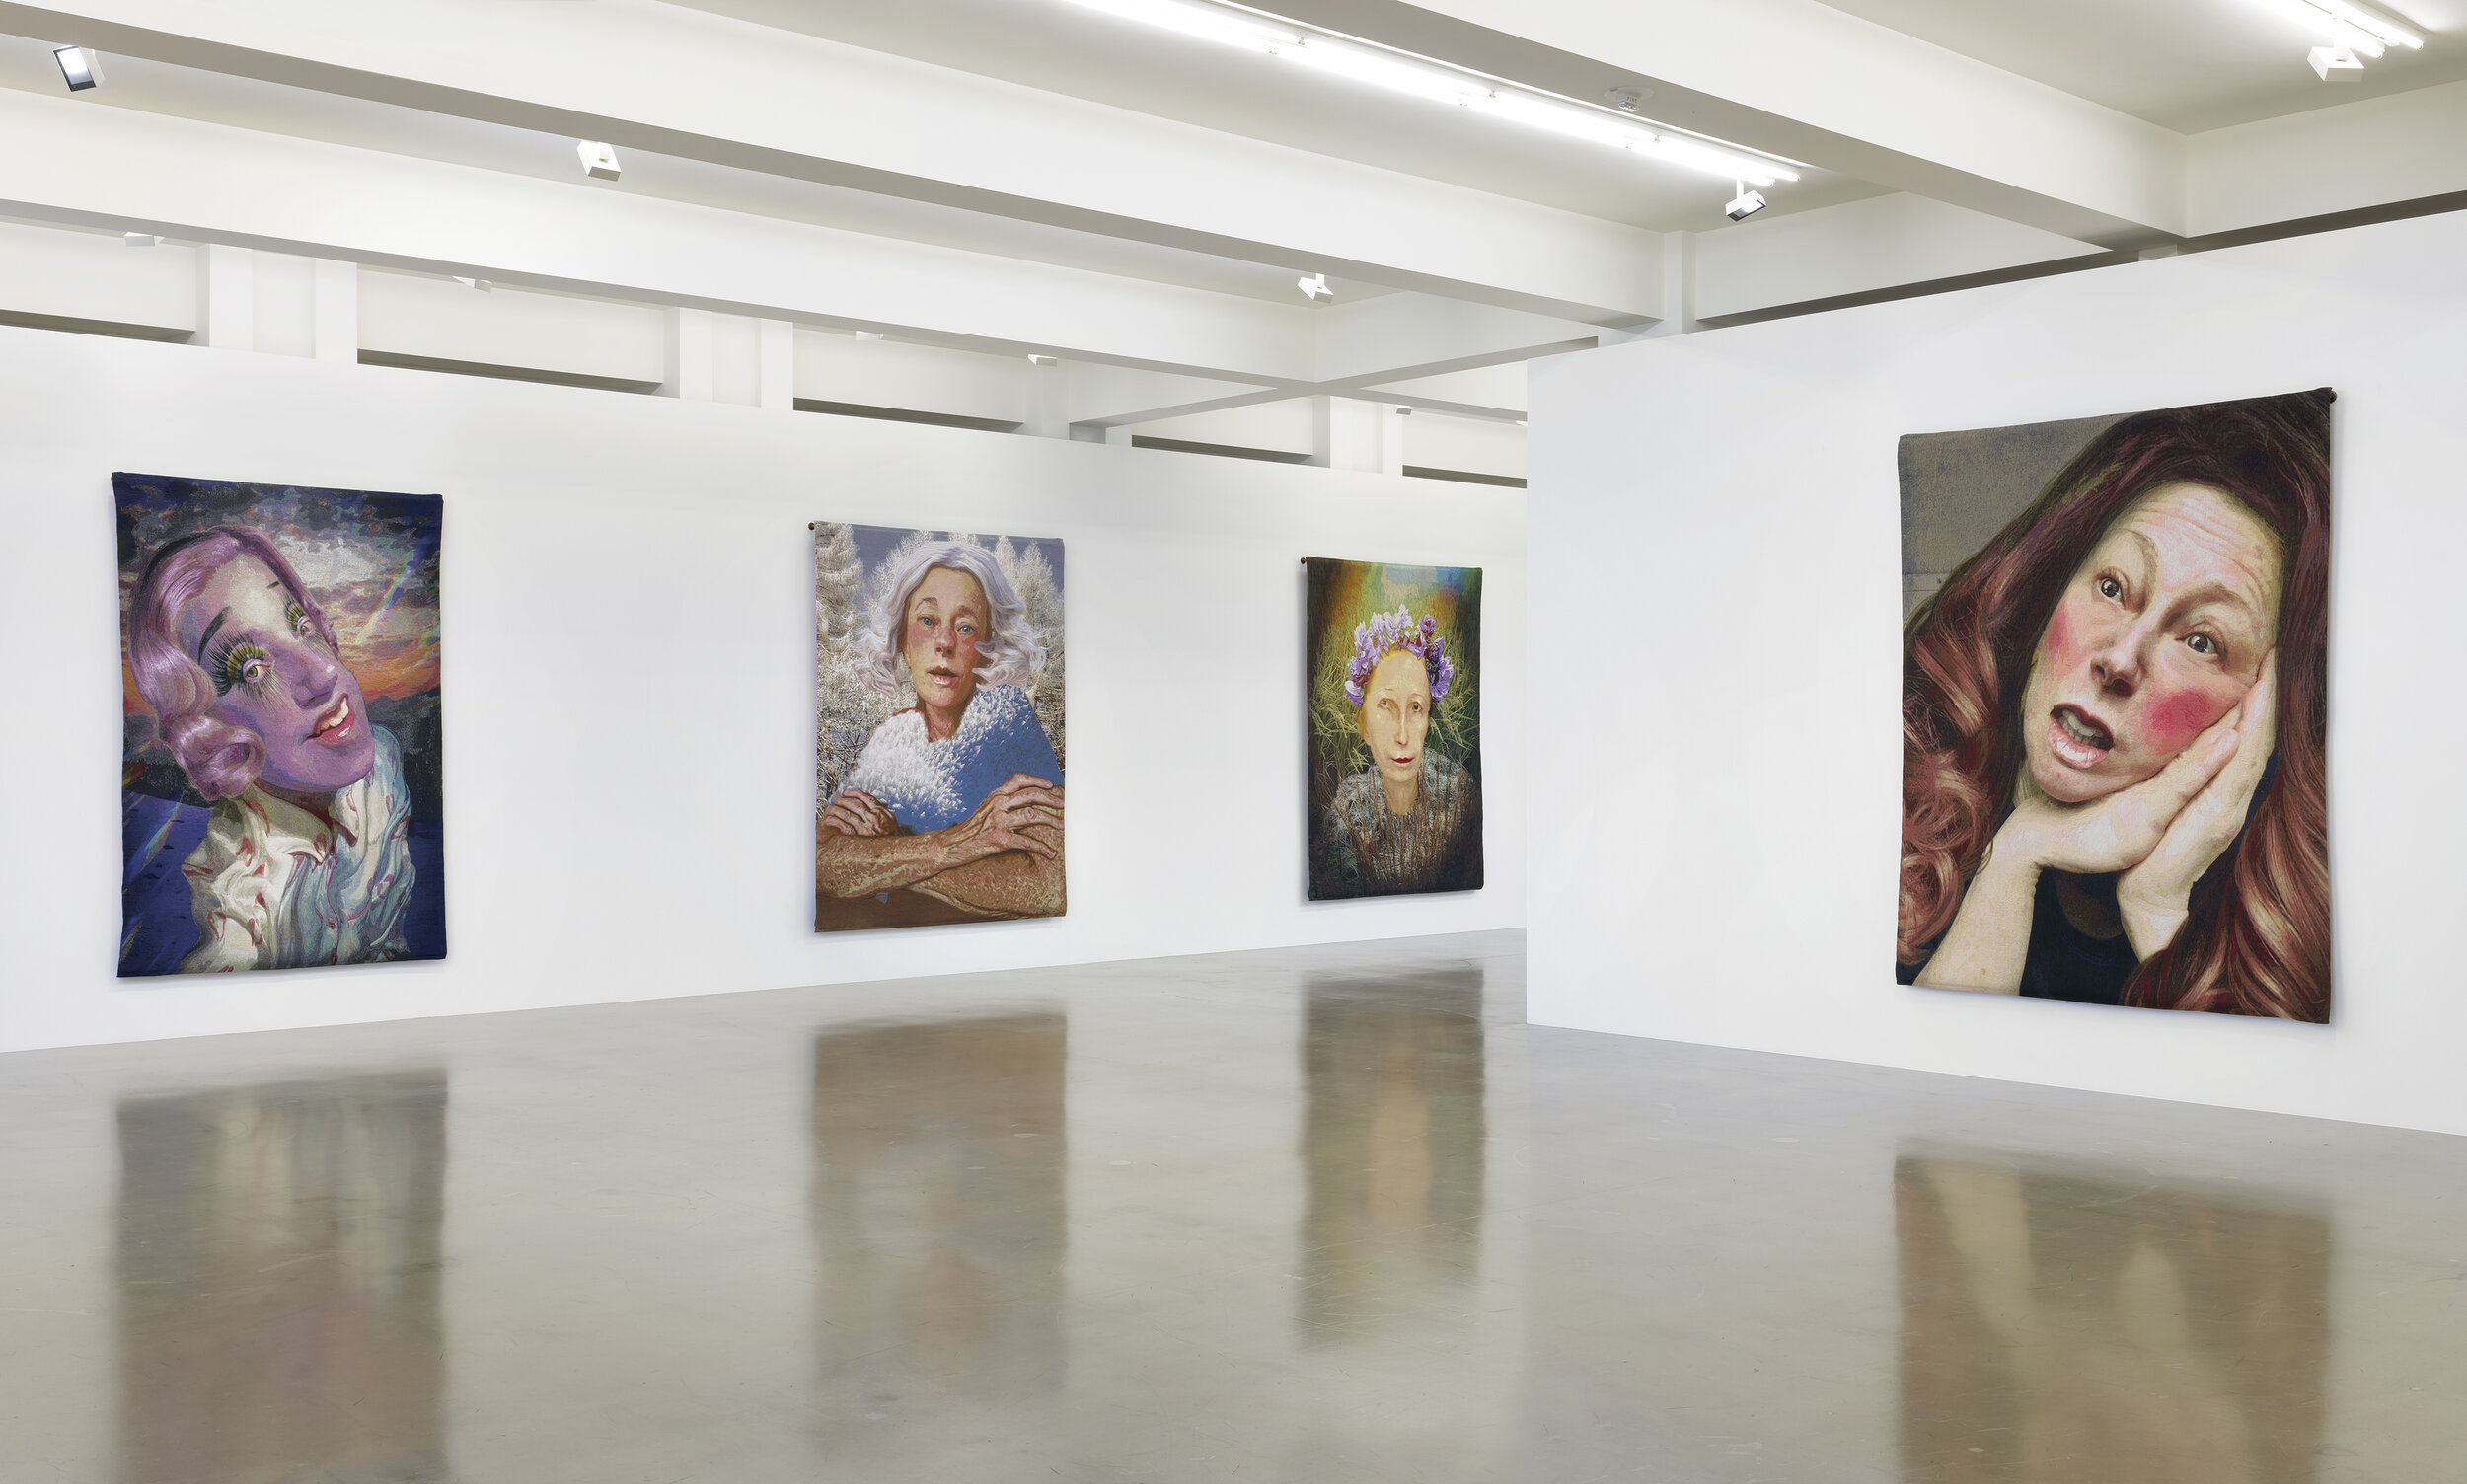  Installation view, Cindy Sherman,  Tapestries  February 16–May 1, 2021, Sprüth Magers, Los Angeles © Cindy Sherman Courtesy the artist, Sprüth Magers and Metro Pictures, New York Photo: Robert Wedemeyer  